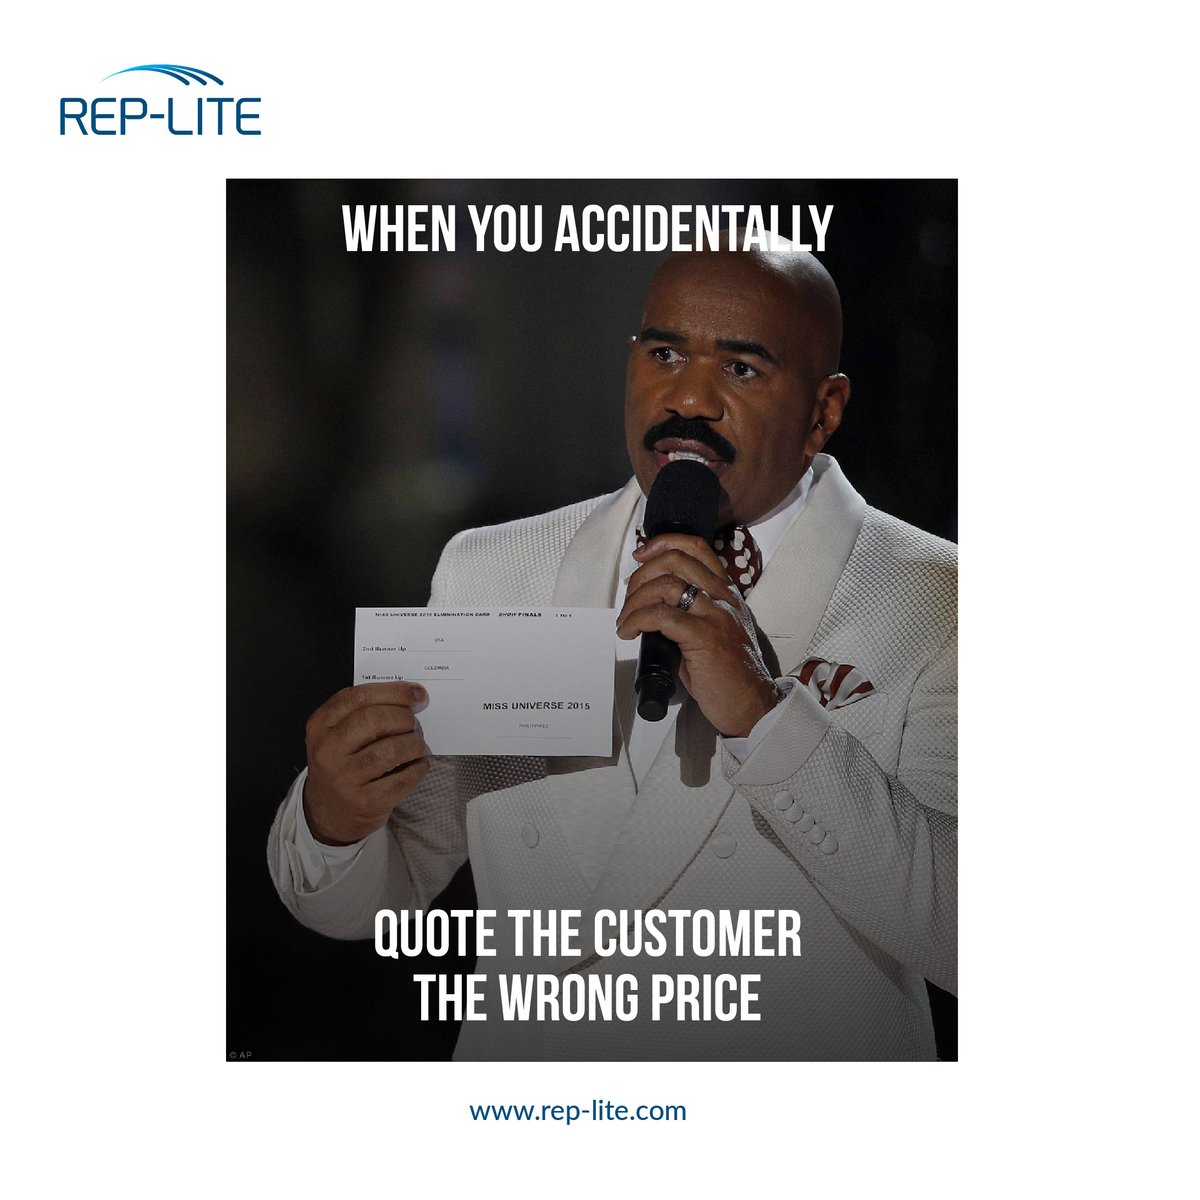 Ever had Steve Harvey's 'Oops!' moment when quoting prices? 😅

#Replite #MedicalSales #SalesLife #SalesHumor #SalesInterview #MedicalSalesHumor #SalesMishaps #PriceQuotes